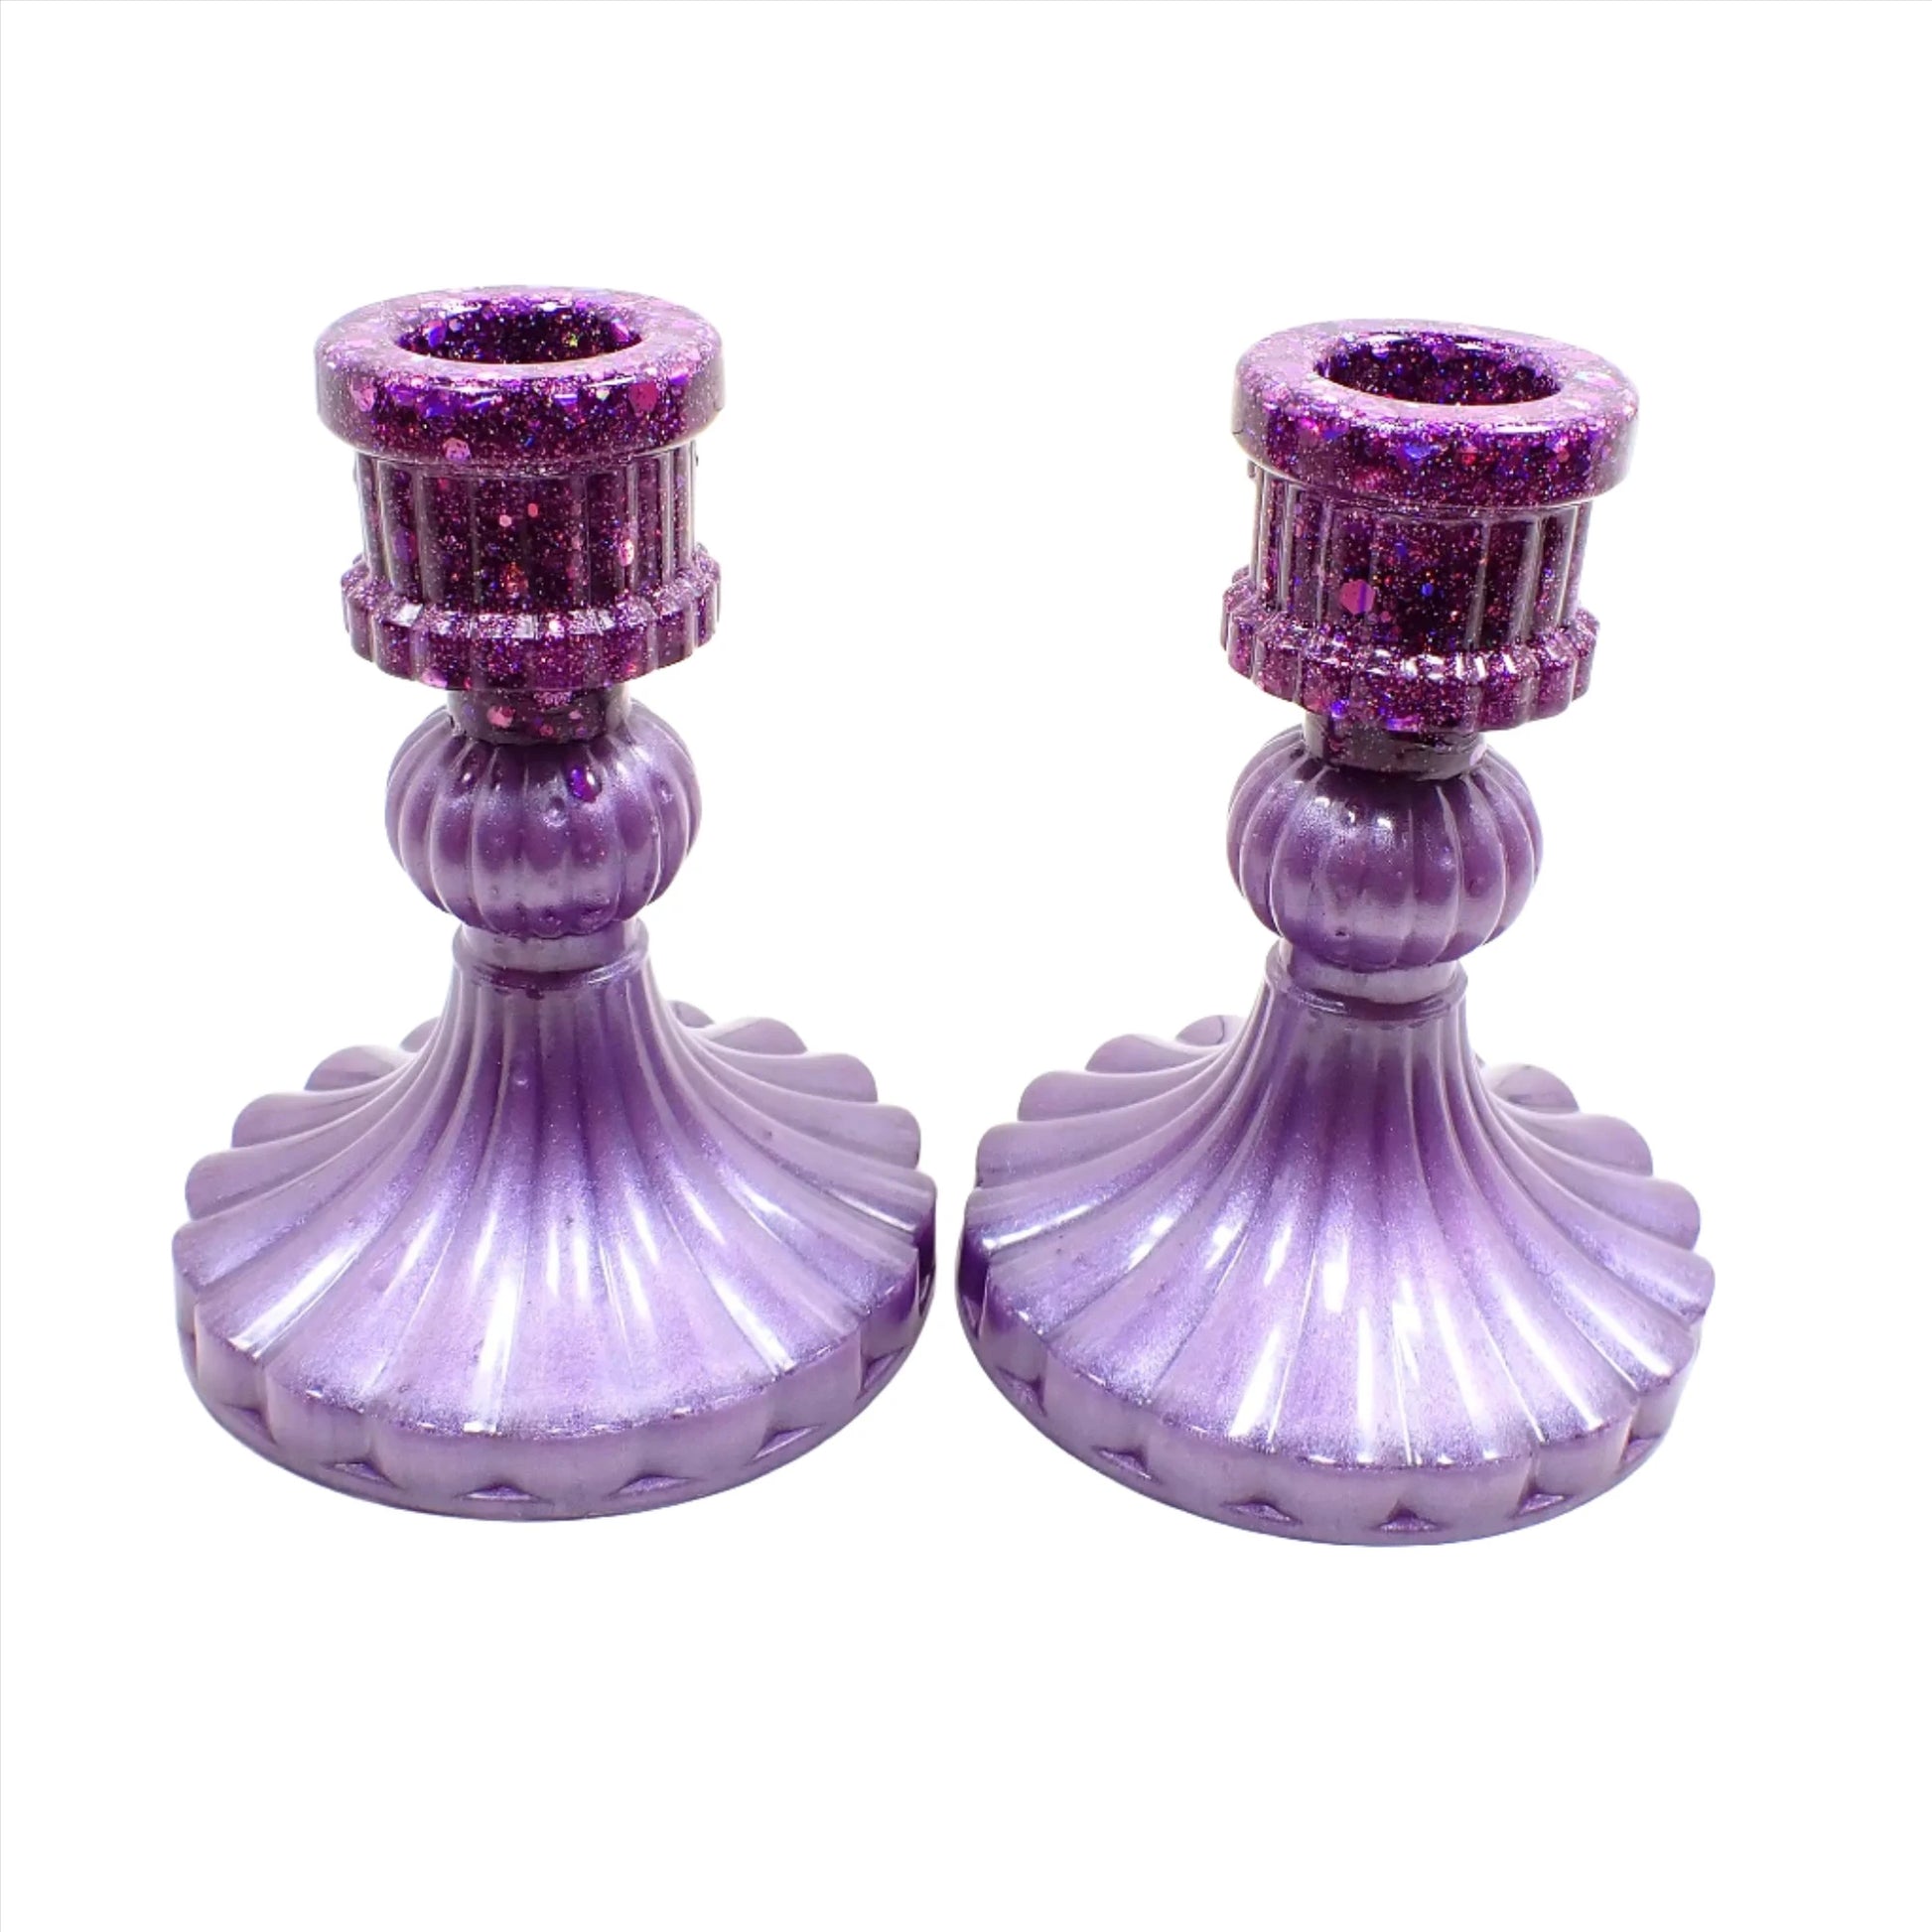 Side view of the handmade vintage style resin candlestick holders. They have light pearly purple resin on the bottom and  iridescent glitter on top. They flare out at the bottom with a corrugated appearance.